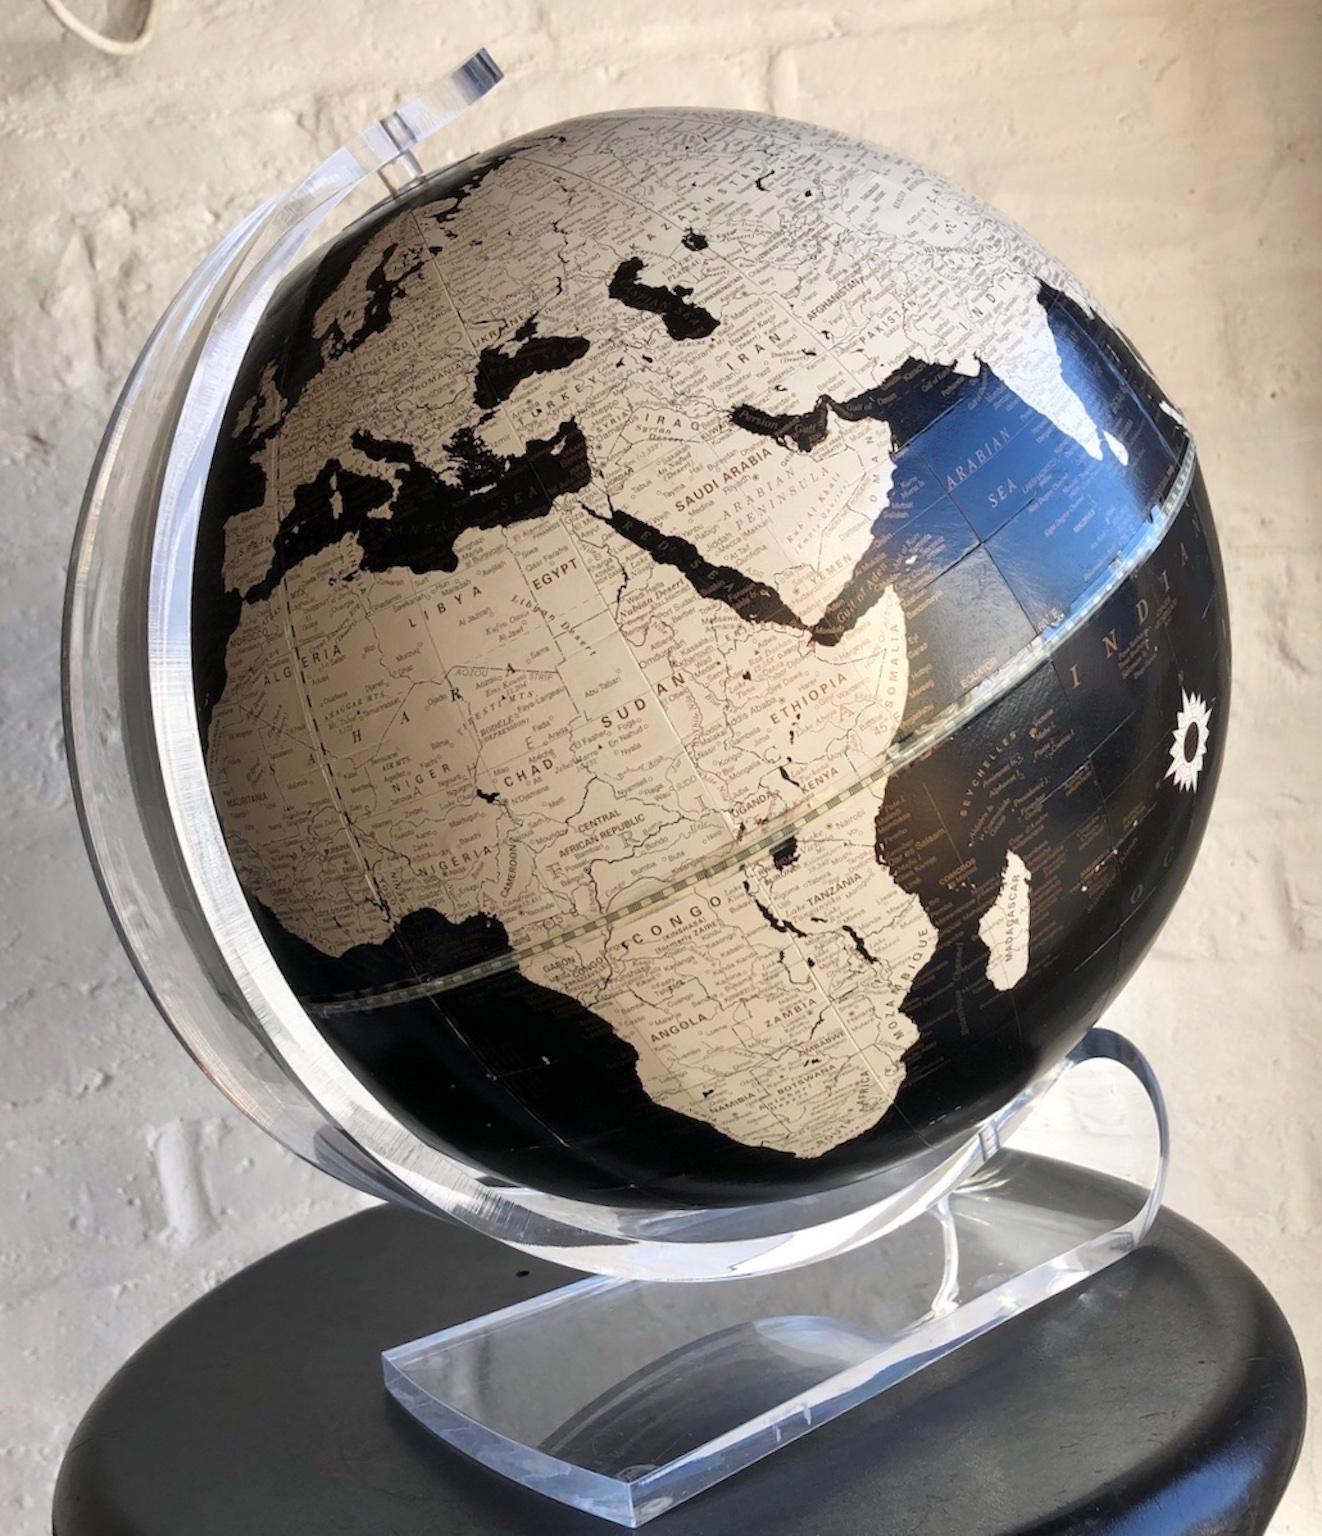 American Mid-Century Modern Imperial World Globe on Lucite Stand by George F. Cram, 1970s